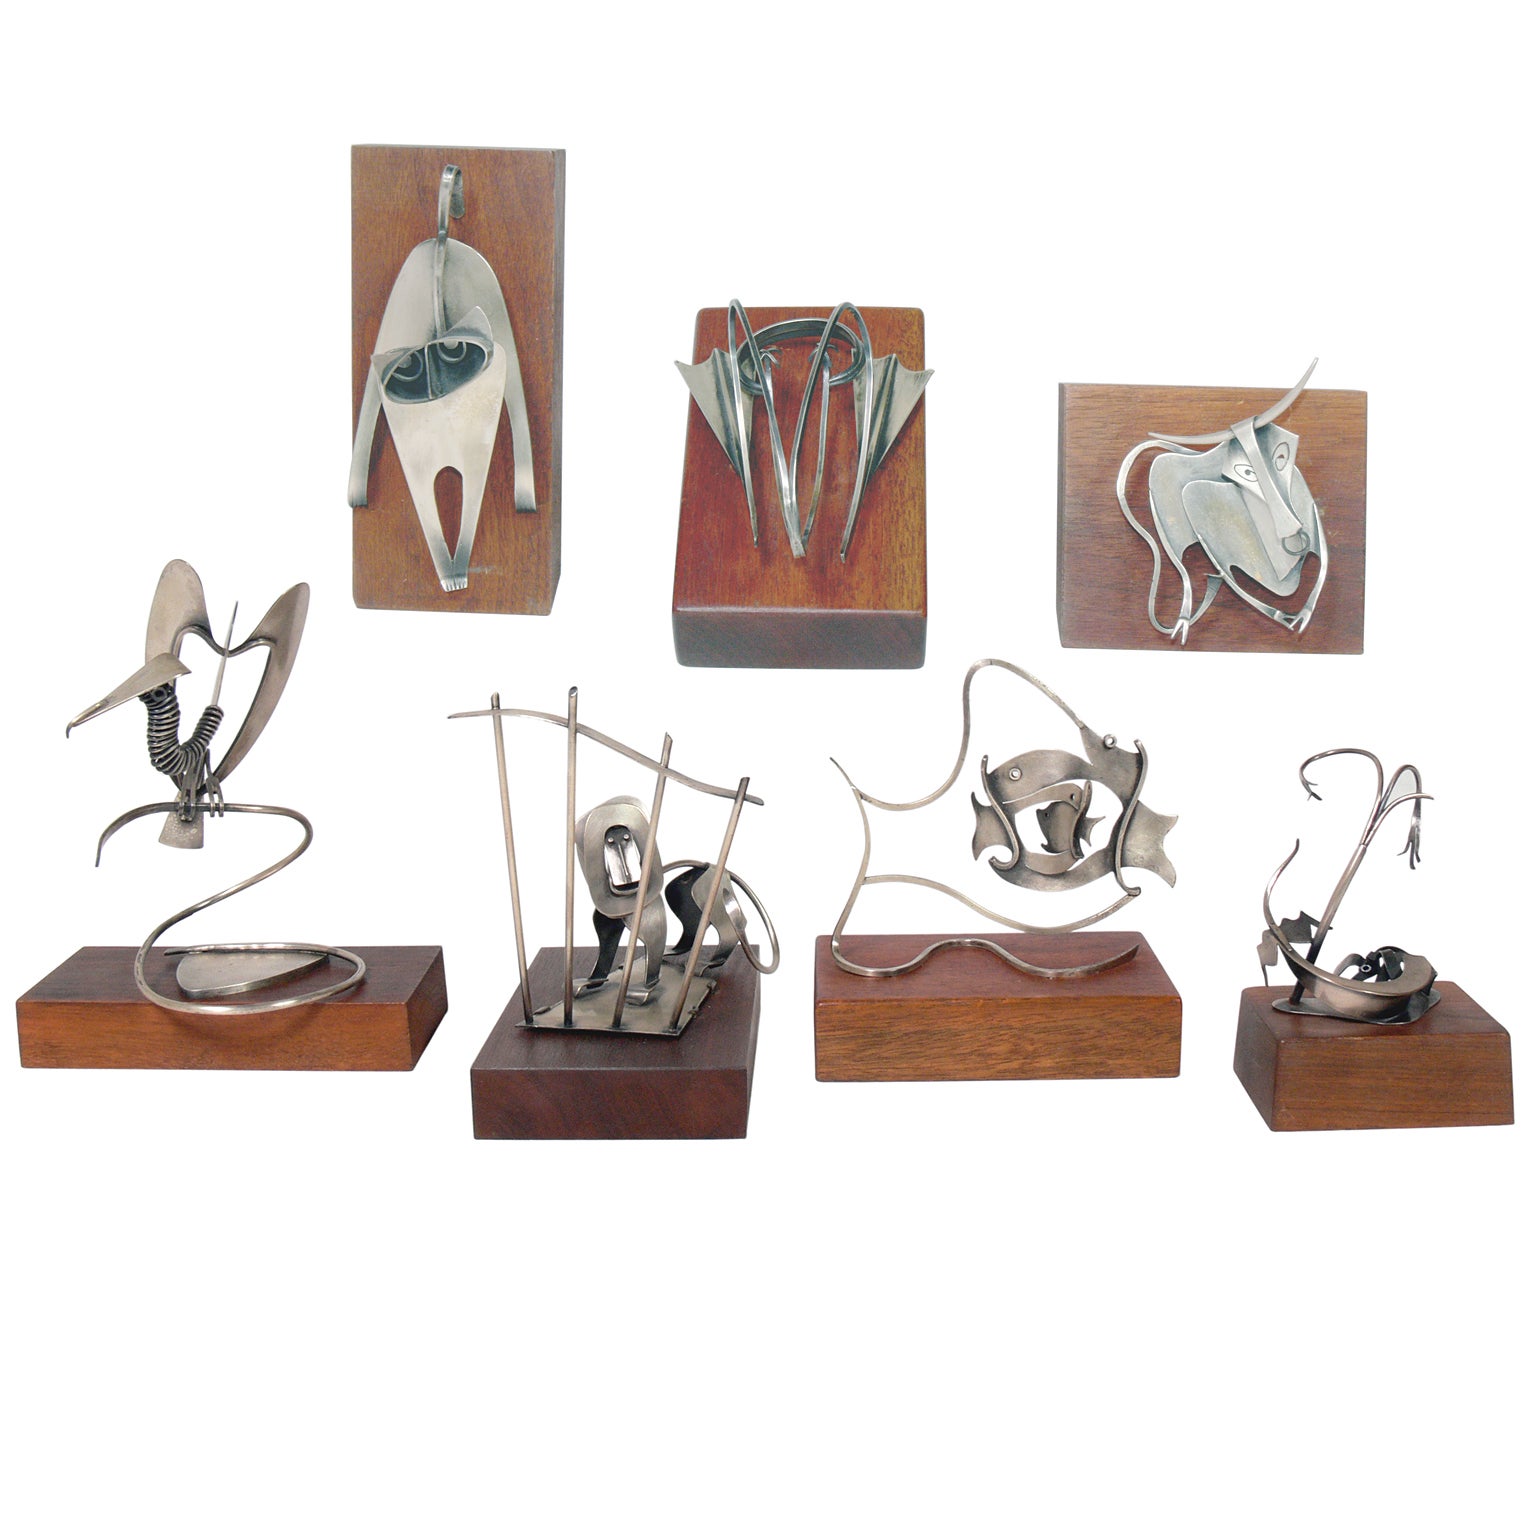 Group of Unique Sterling Silver Sculptures by Paul Lobel